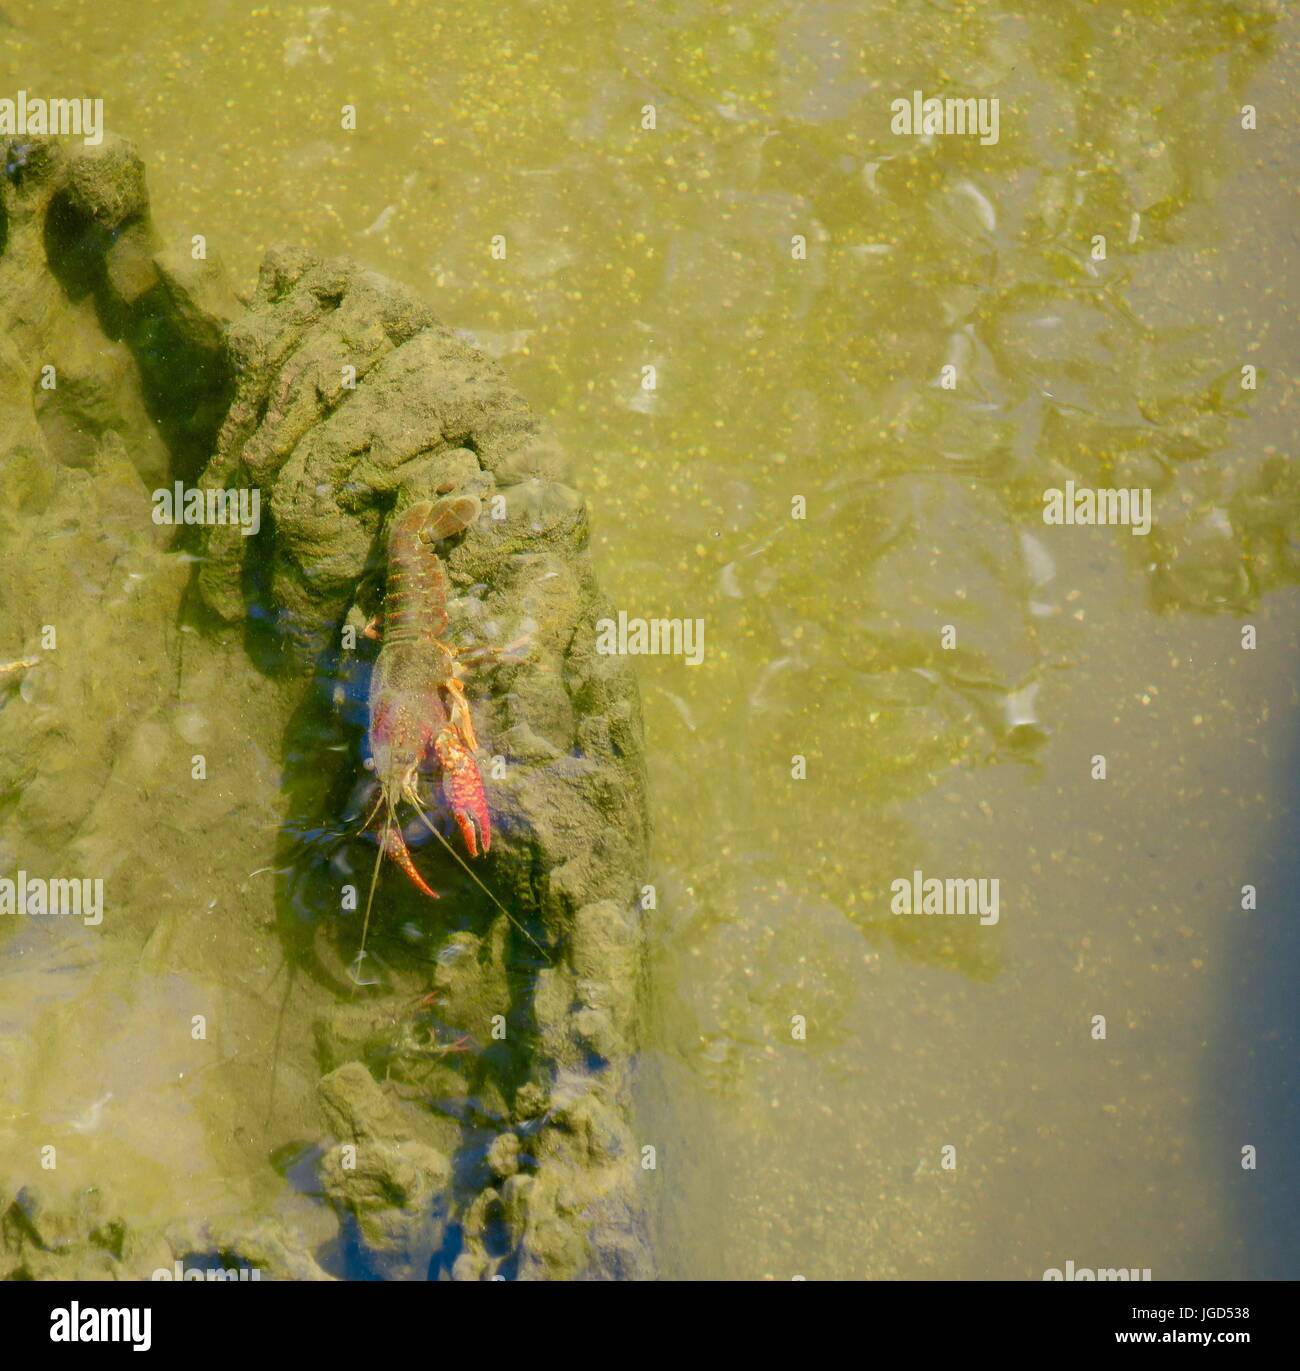 orange-colored crawdad crawling on an old tree stump in a green murky pond Stock Photo